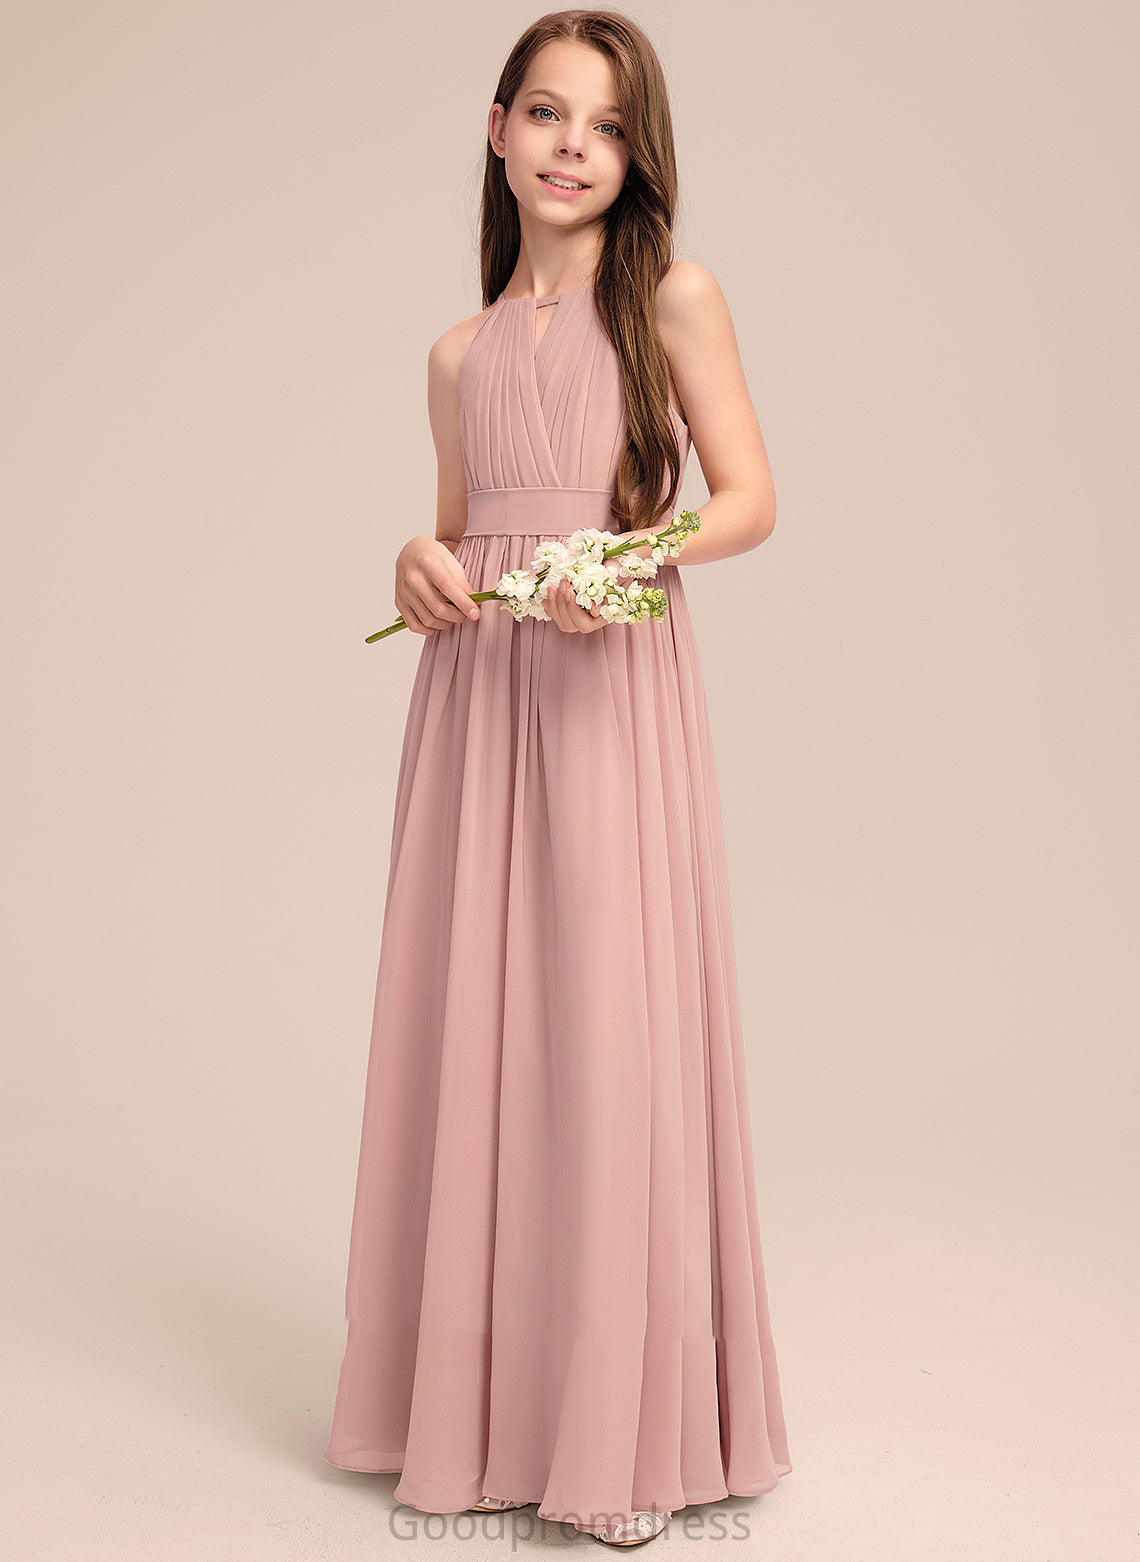 Junior Bridesmaid Dresses Chiffon Bow(s) Ruffle Scoop Floor-Length With Neck Mariam A-Line